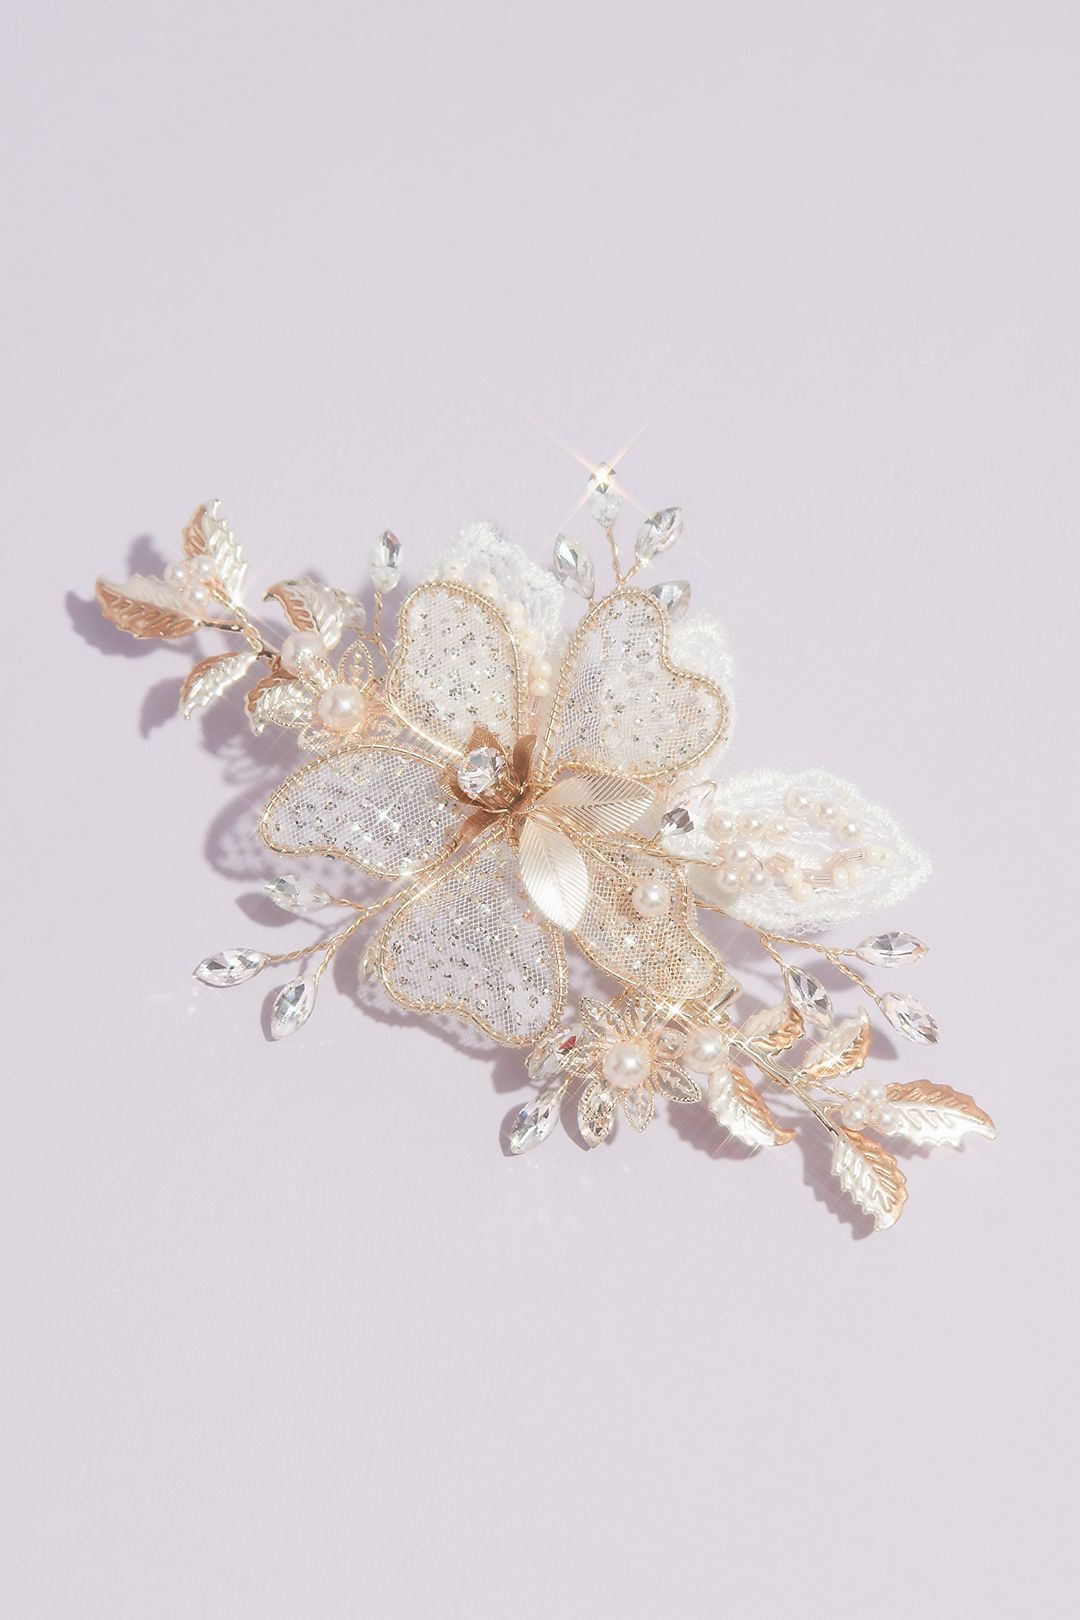 Shimmery Floral Hair Clip with Crystals and Beads | David's Bridal